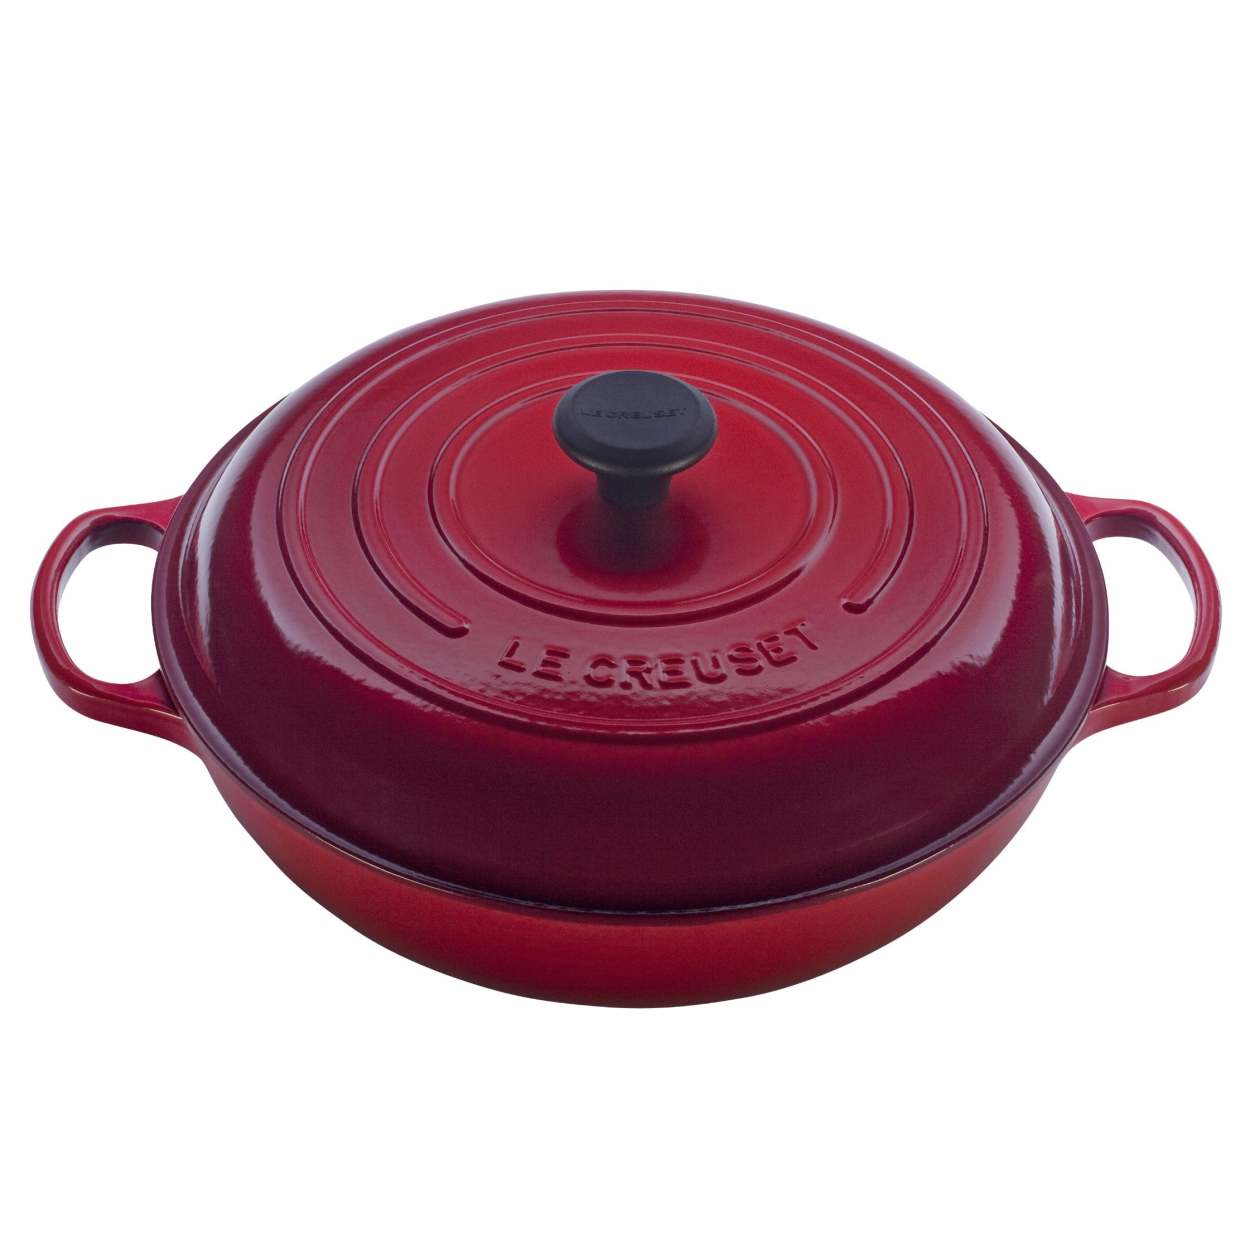 Le Creuset Enameled Cast Iron Bistro Grill Pan, 12-2/3-Inch, Cherry